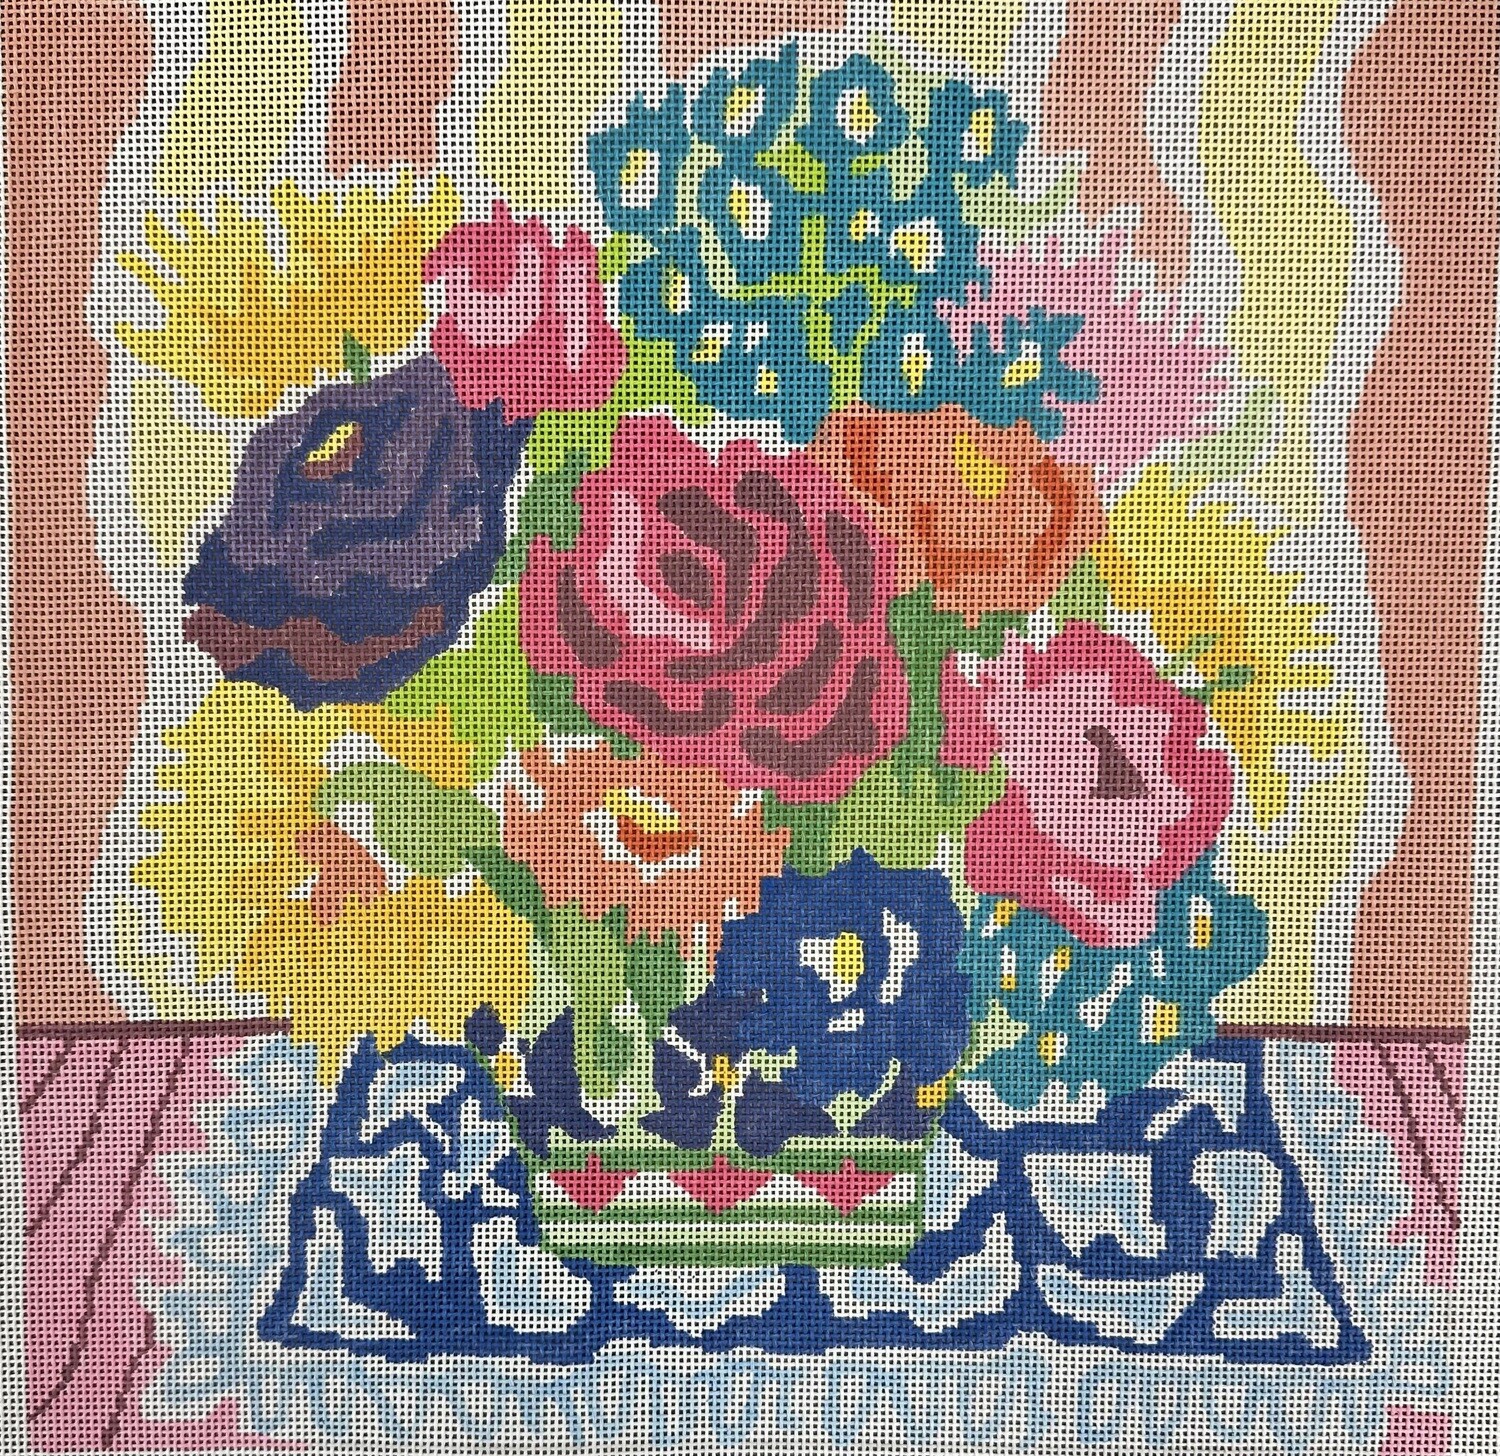 Matisse Table # 17 (Handpainted by Jean Smith)